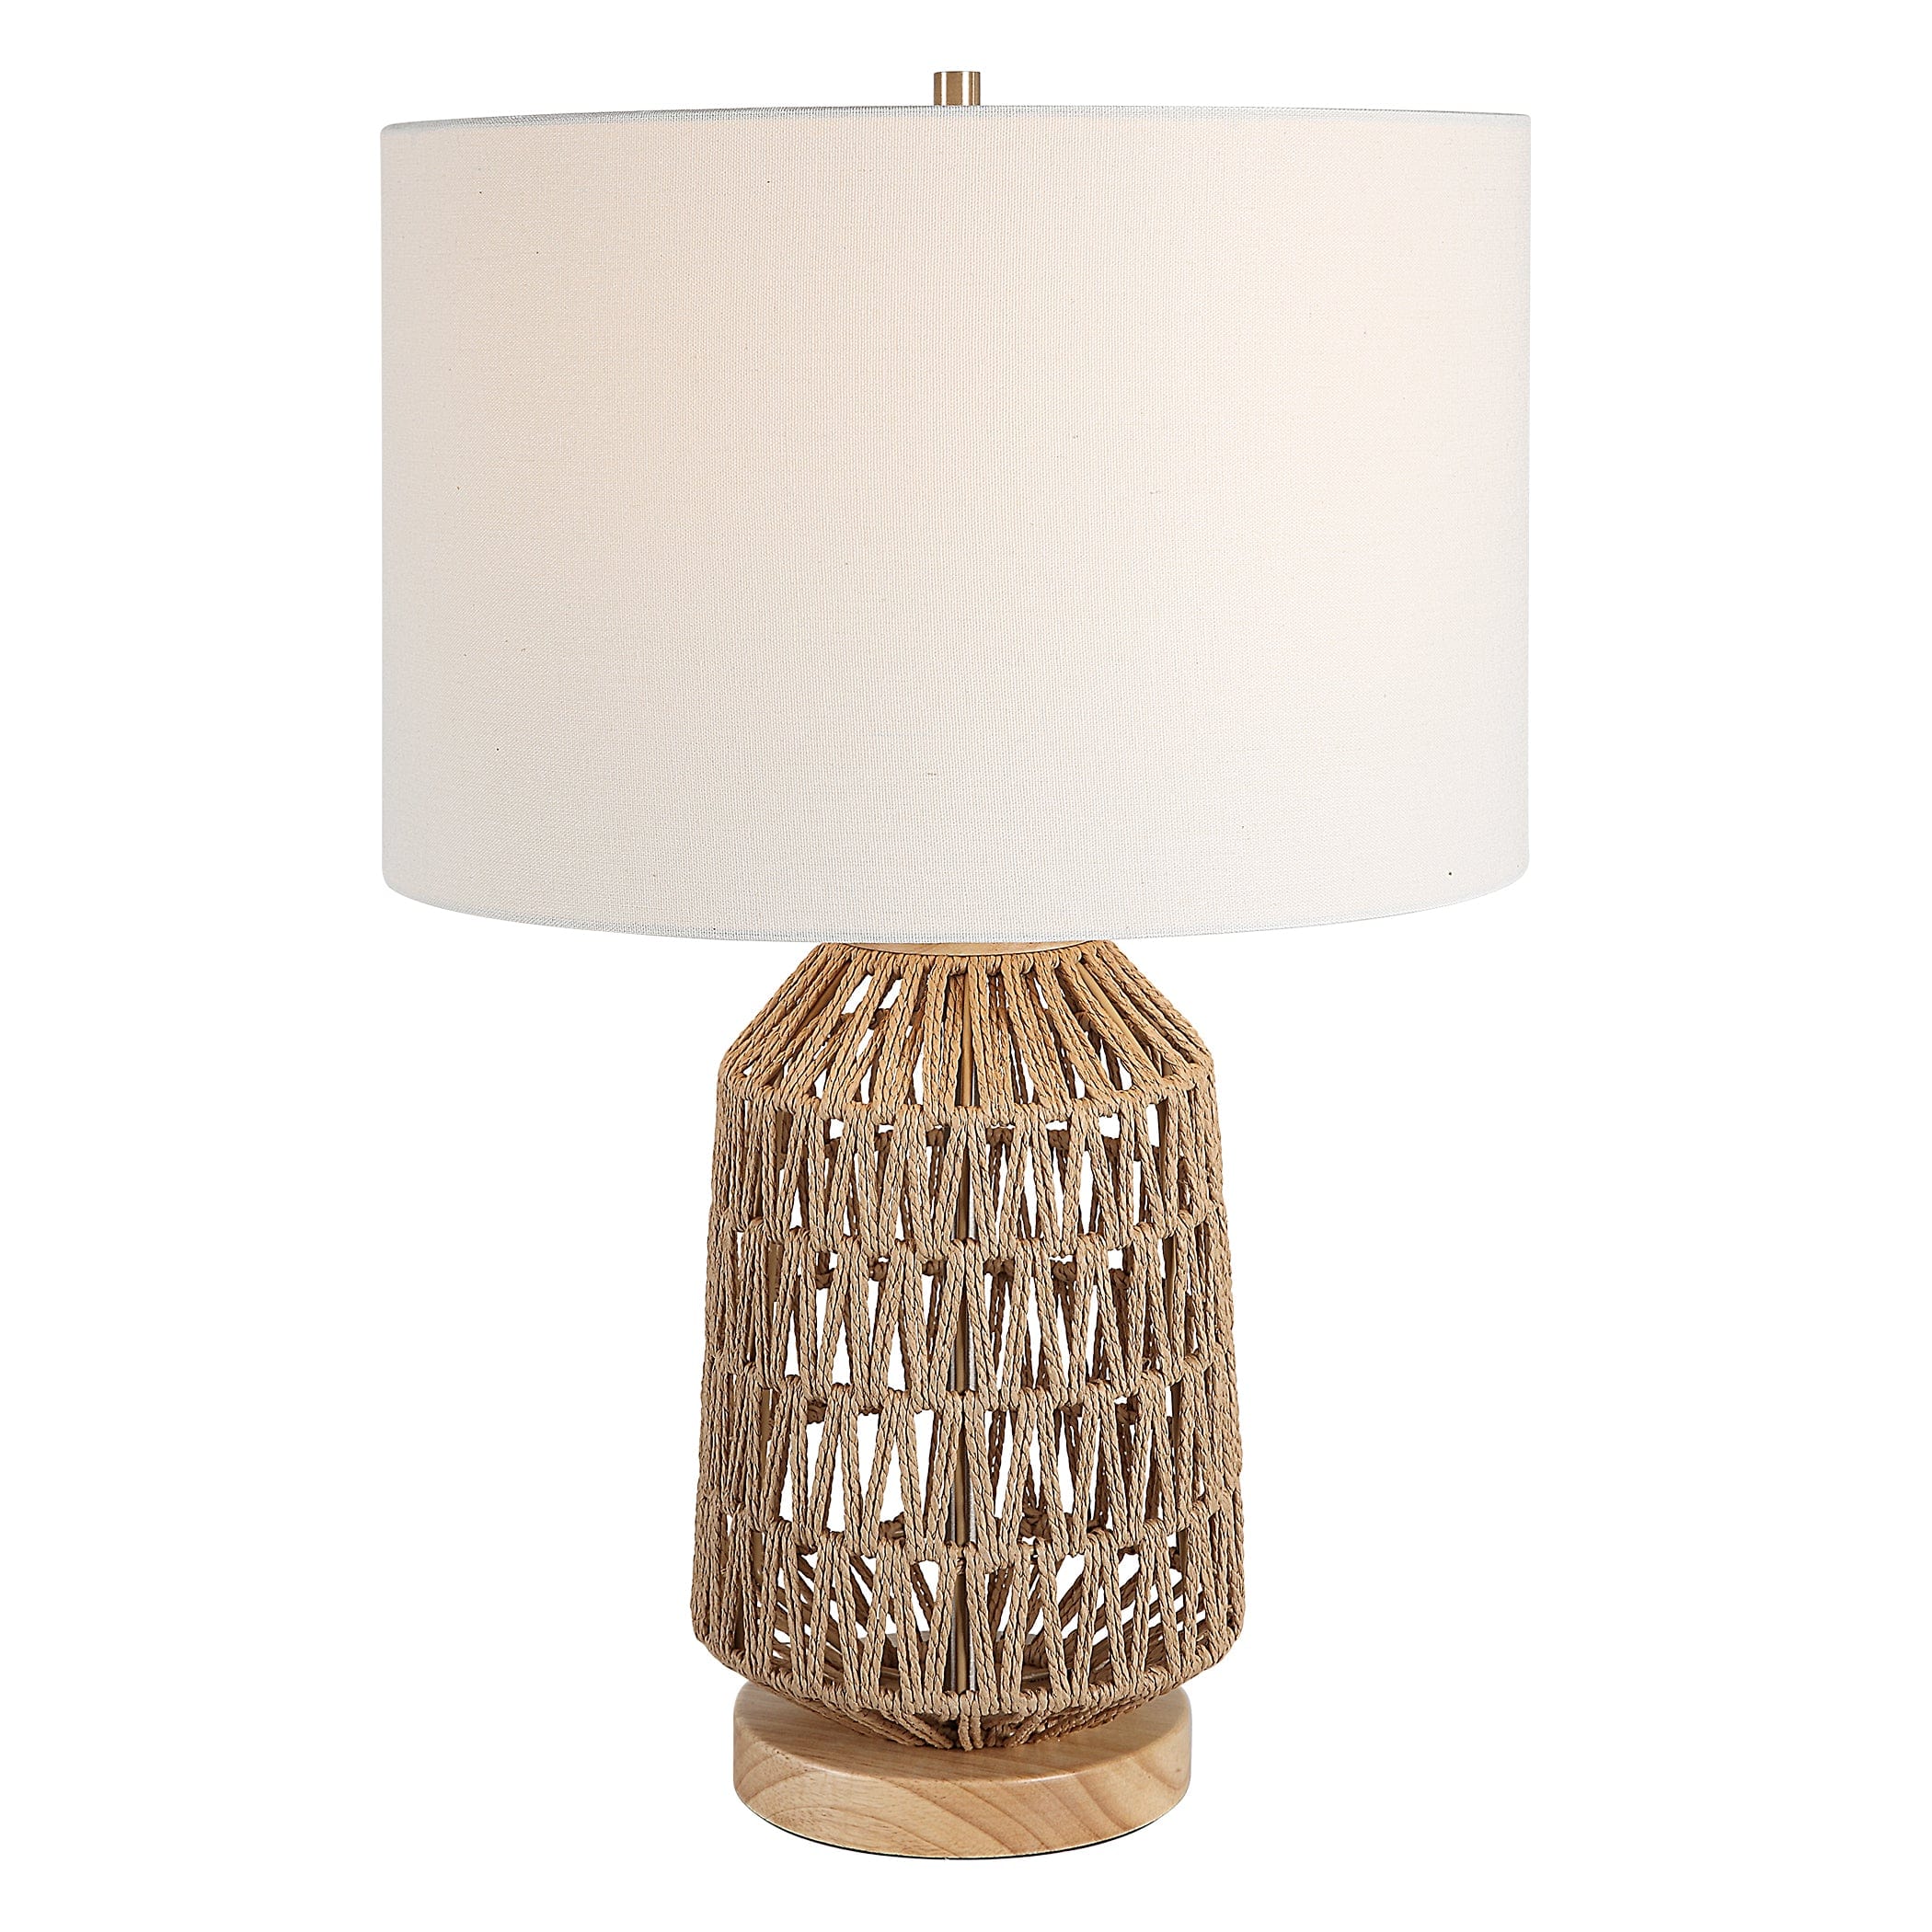 TABLE LAMP-W26130-1 Uttermost